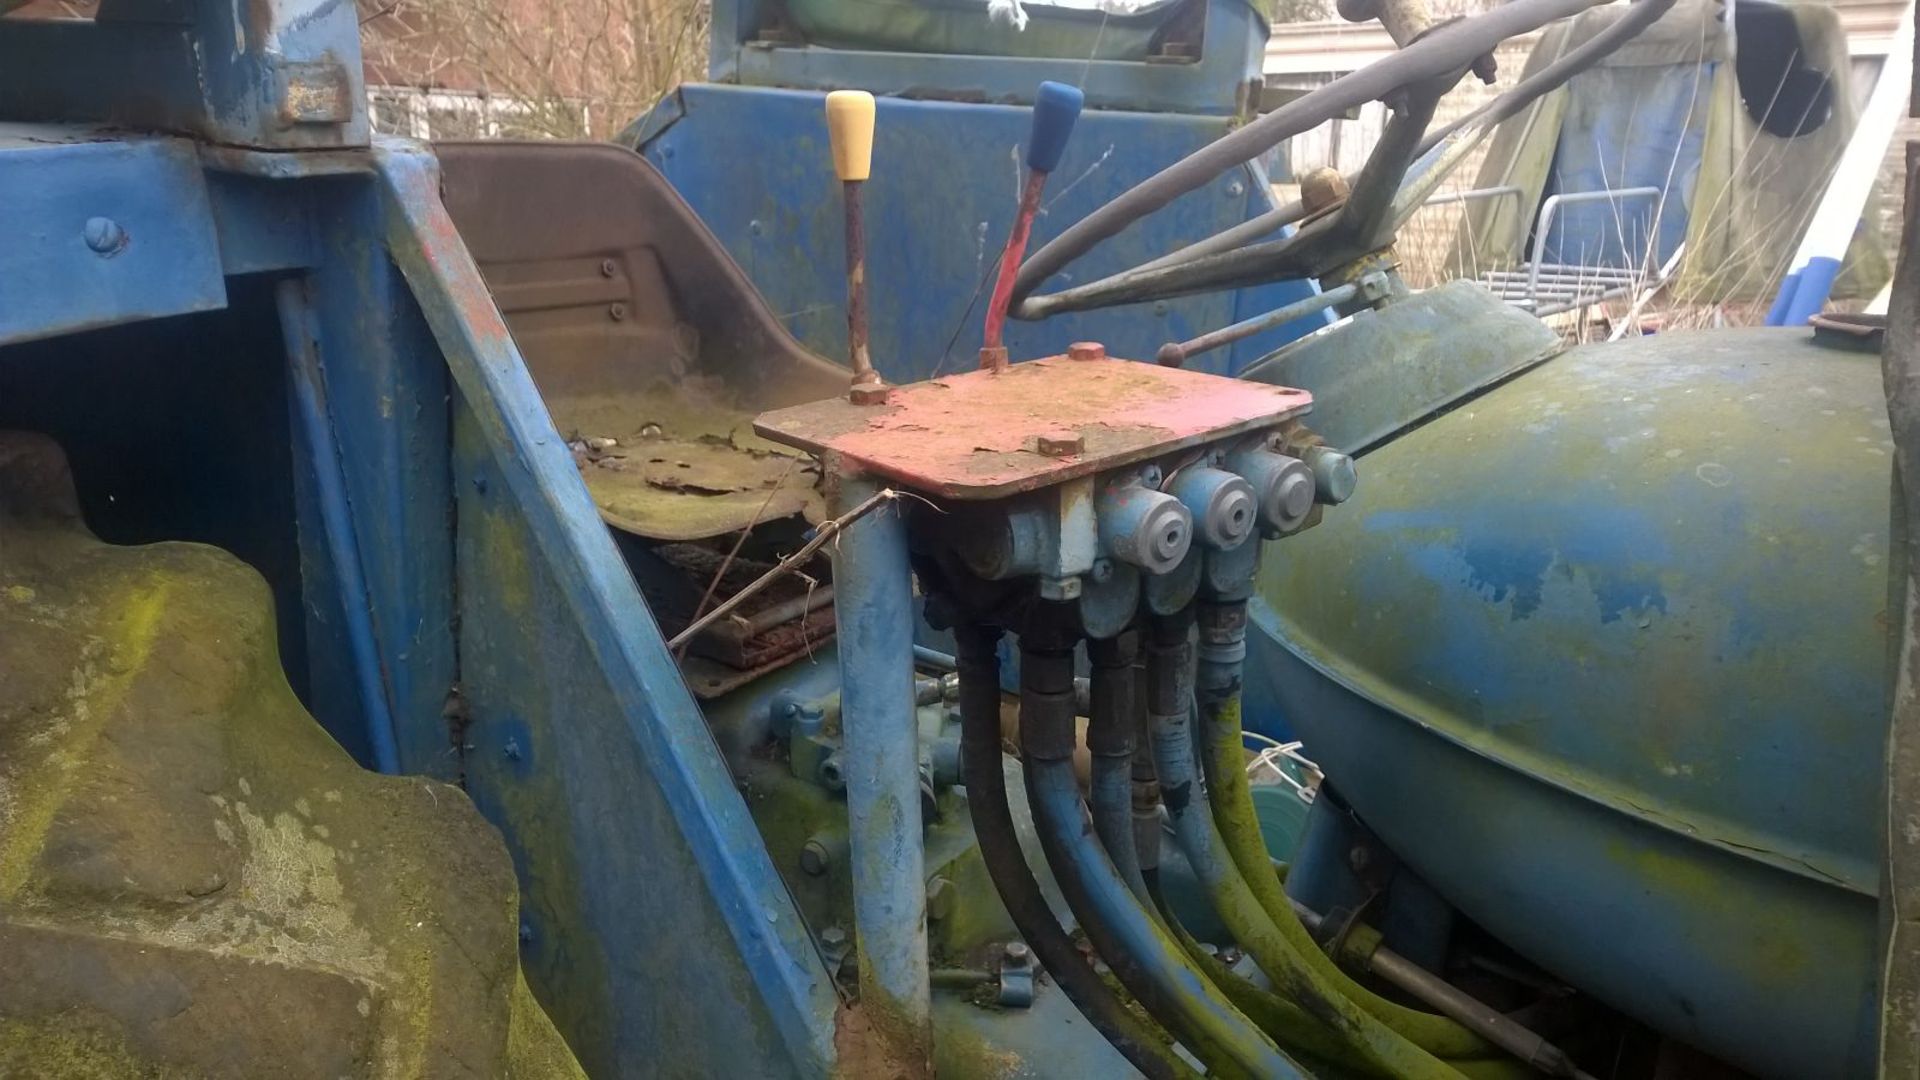 FORDSON  SUPER MAJOR c/w POWER LOADER   WE HAVENT HEARD IT RUNNING YET BUT WE ARE INTENDING TO GET - Image 10 of 20